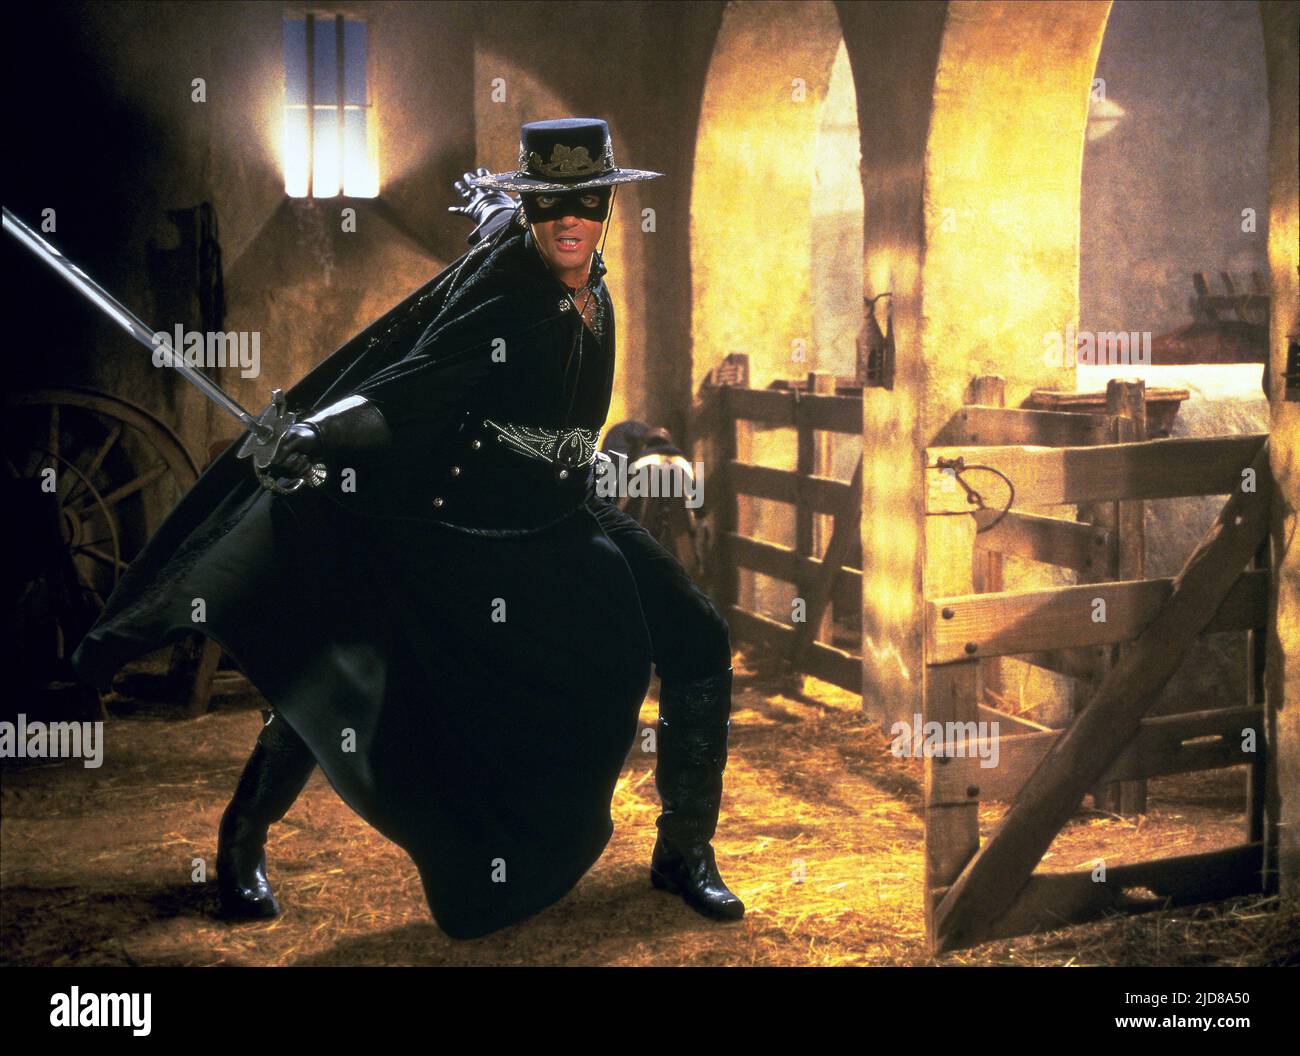 The Mask Of Zorro At 25: An Oral History Of The Last Old School Blockbuster